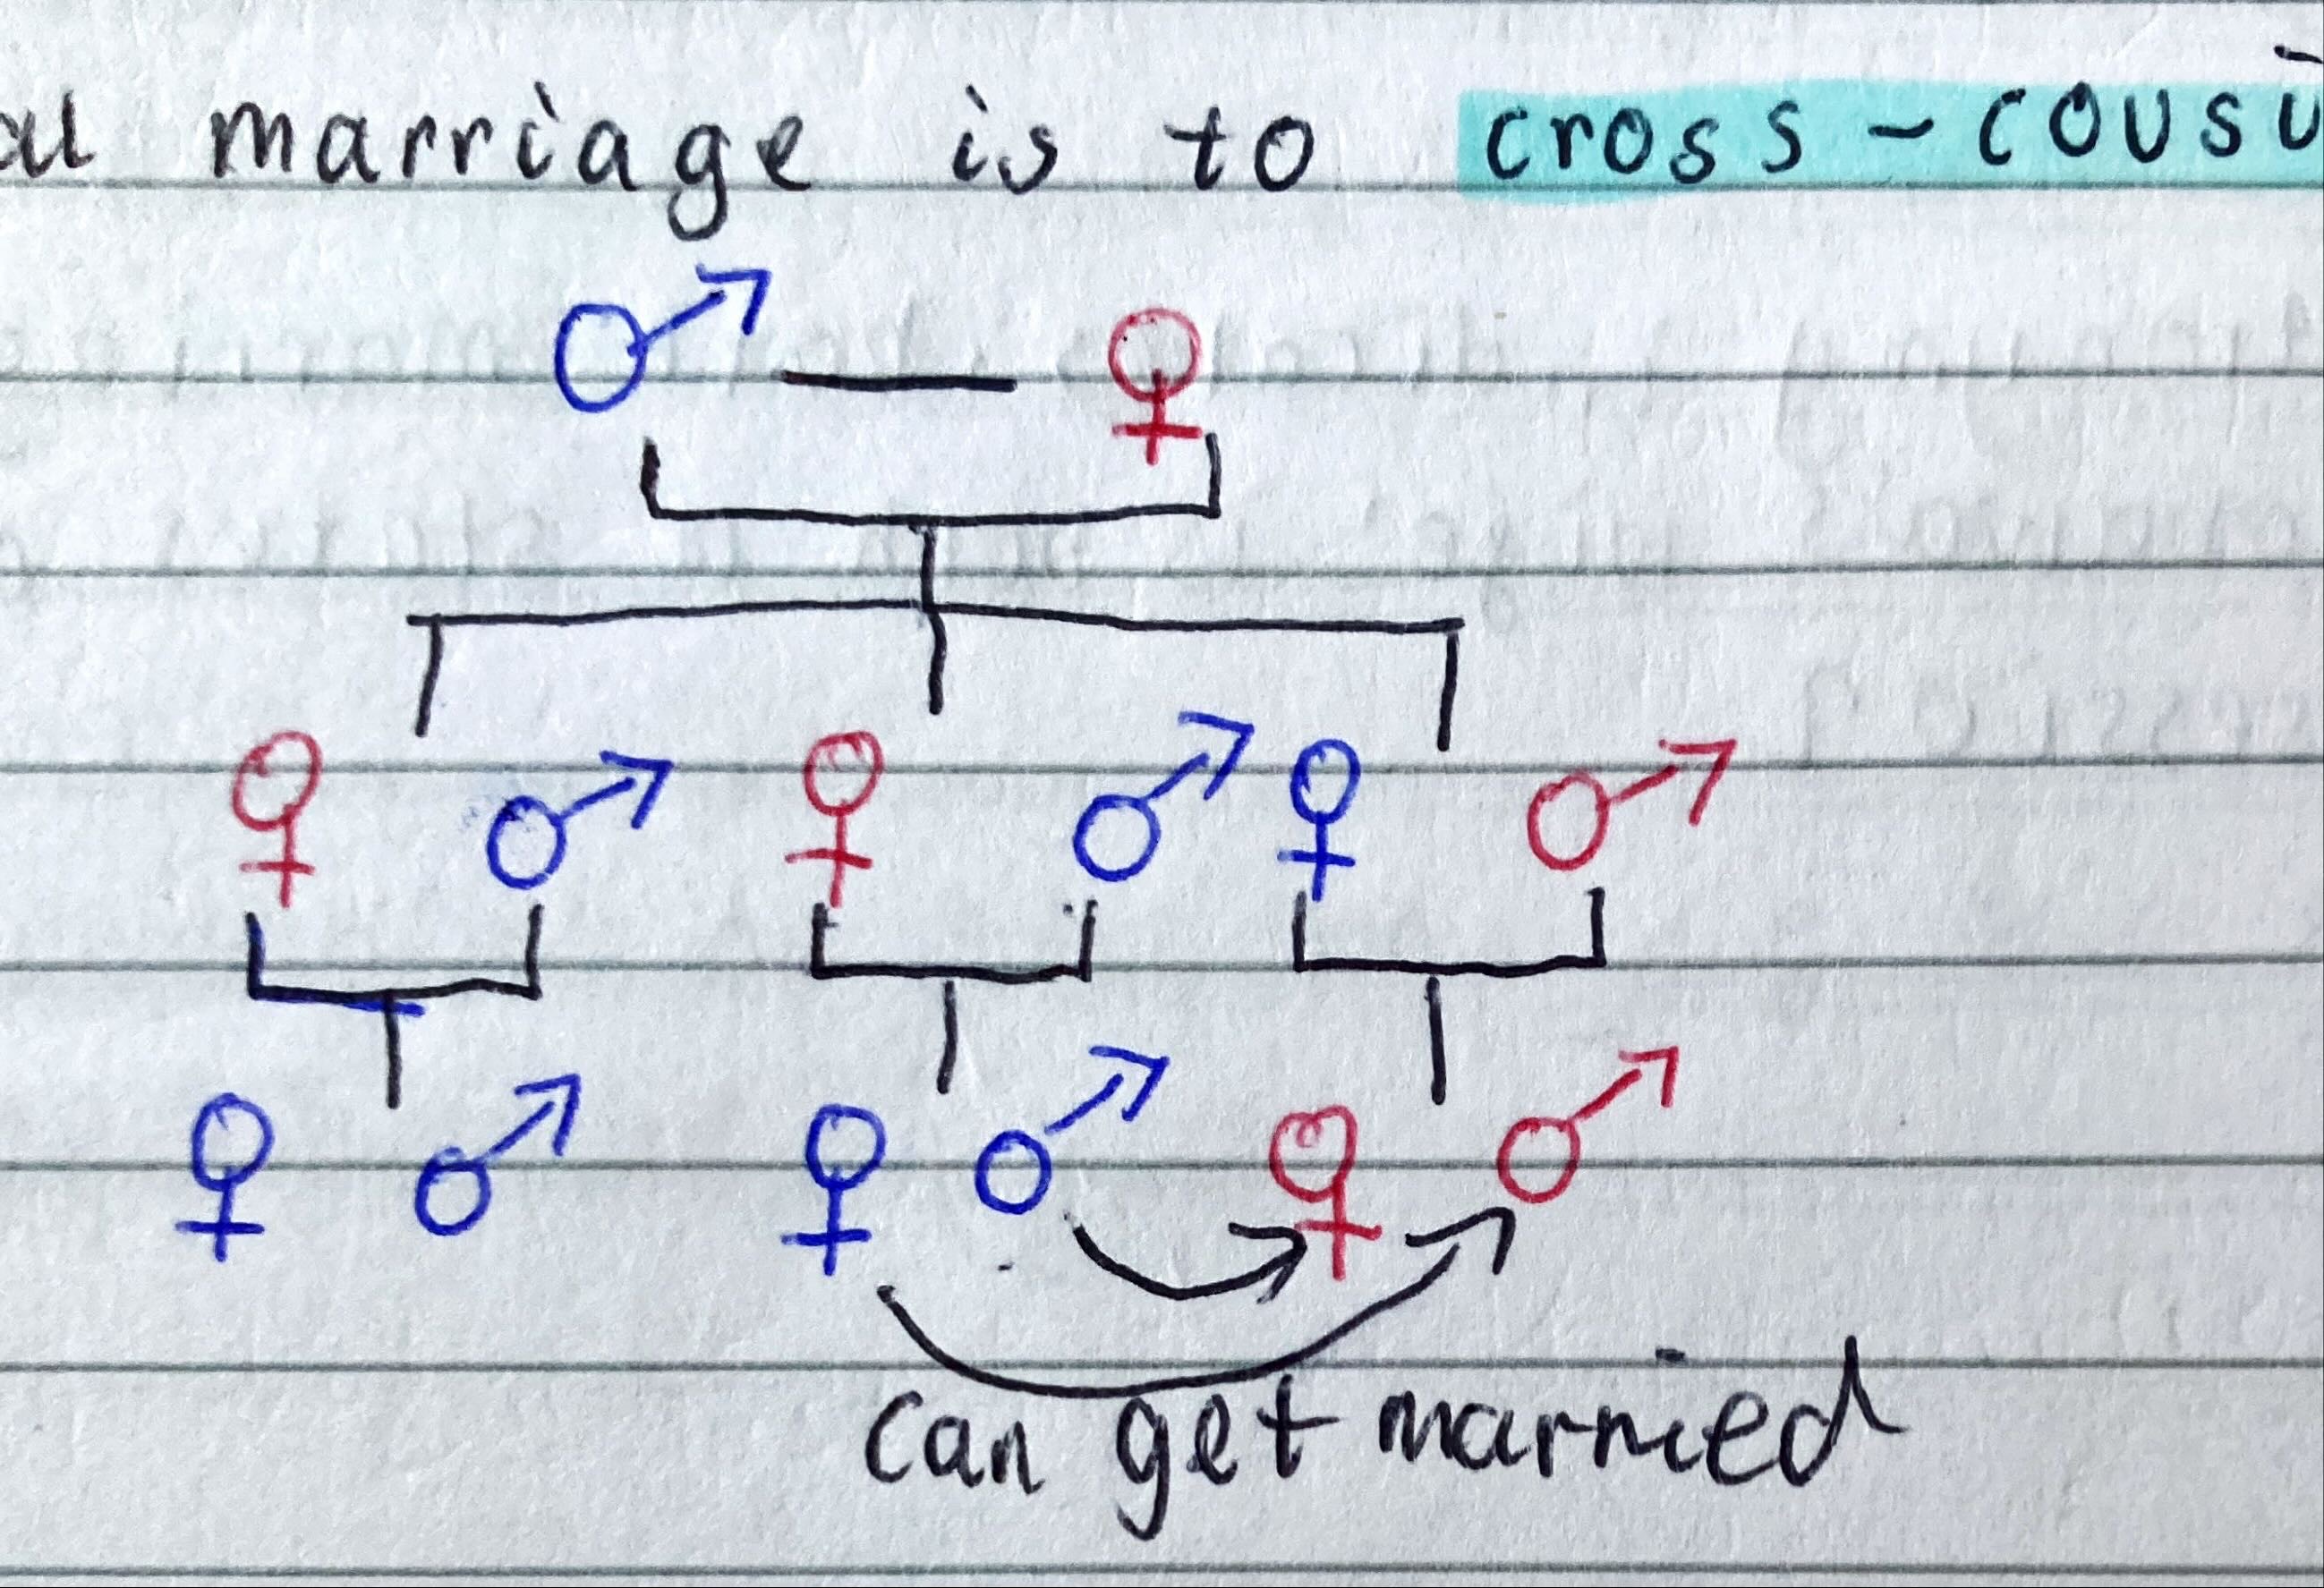 <p>-due to the existence of moieties and patrilineal exogamy, there is a pressure to marry outside of your close kin</p><p>-however, the benefit of having a tightly knit shabono means there is pressure to marry someone who has become your kin</p><p>**the ideal marriage is cross cousin marriage</p>